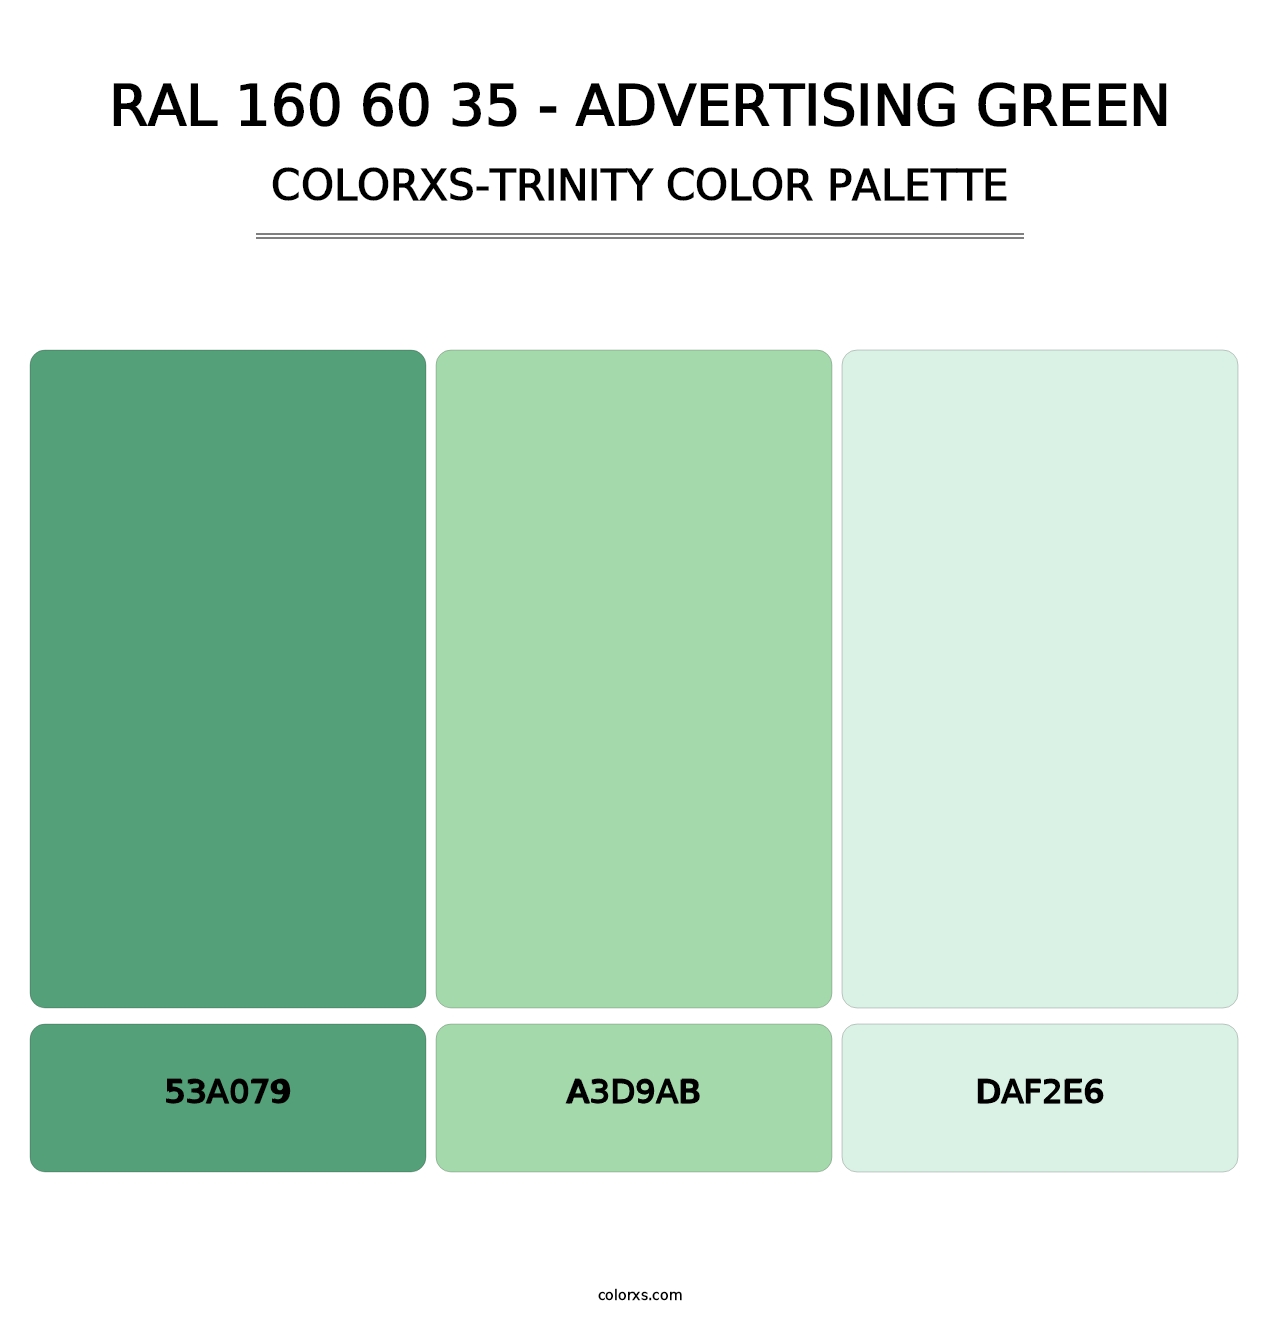 RAL 160 60 35 - Advertising Green - Colorxs Trinity Palette